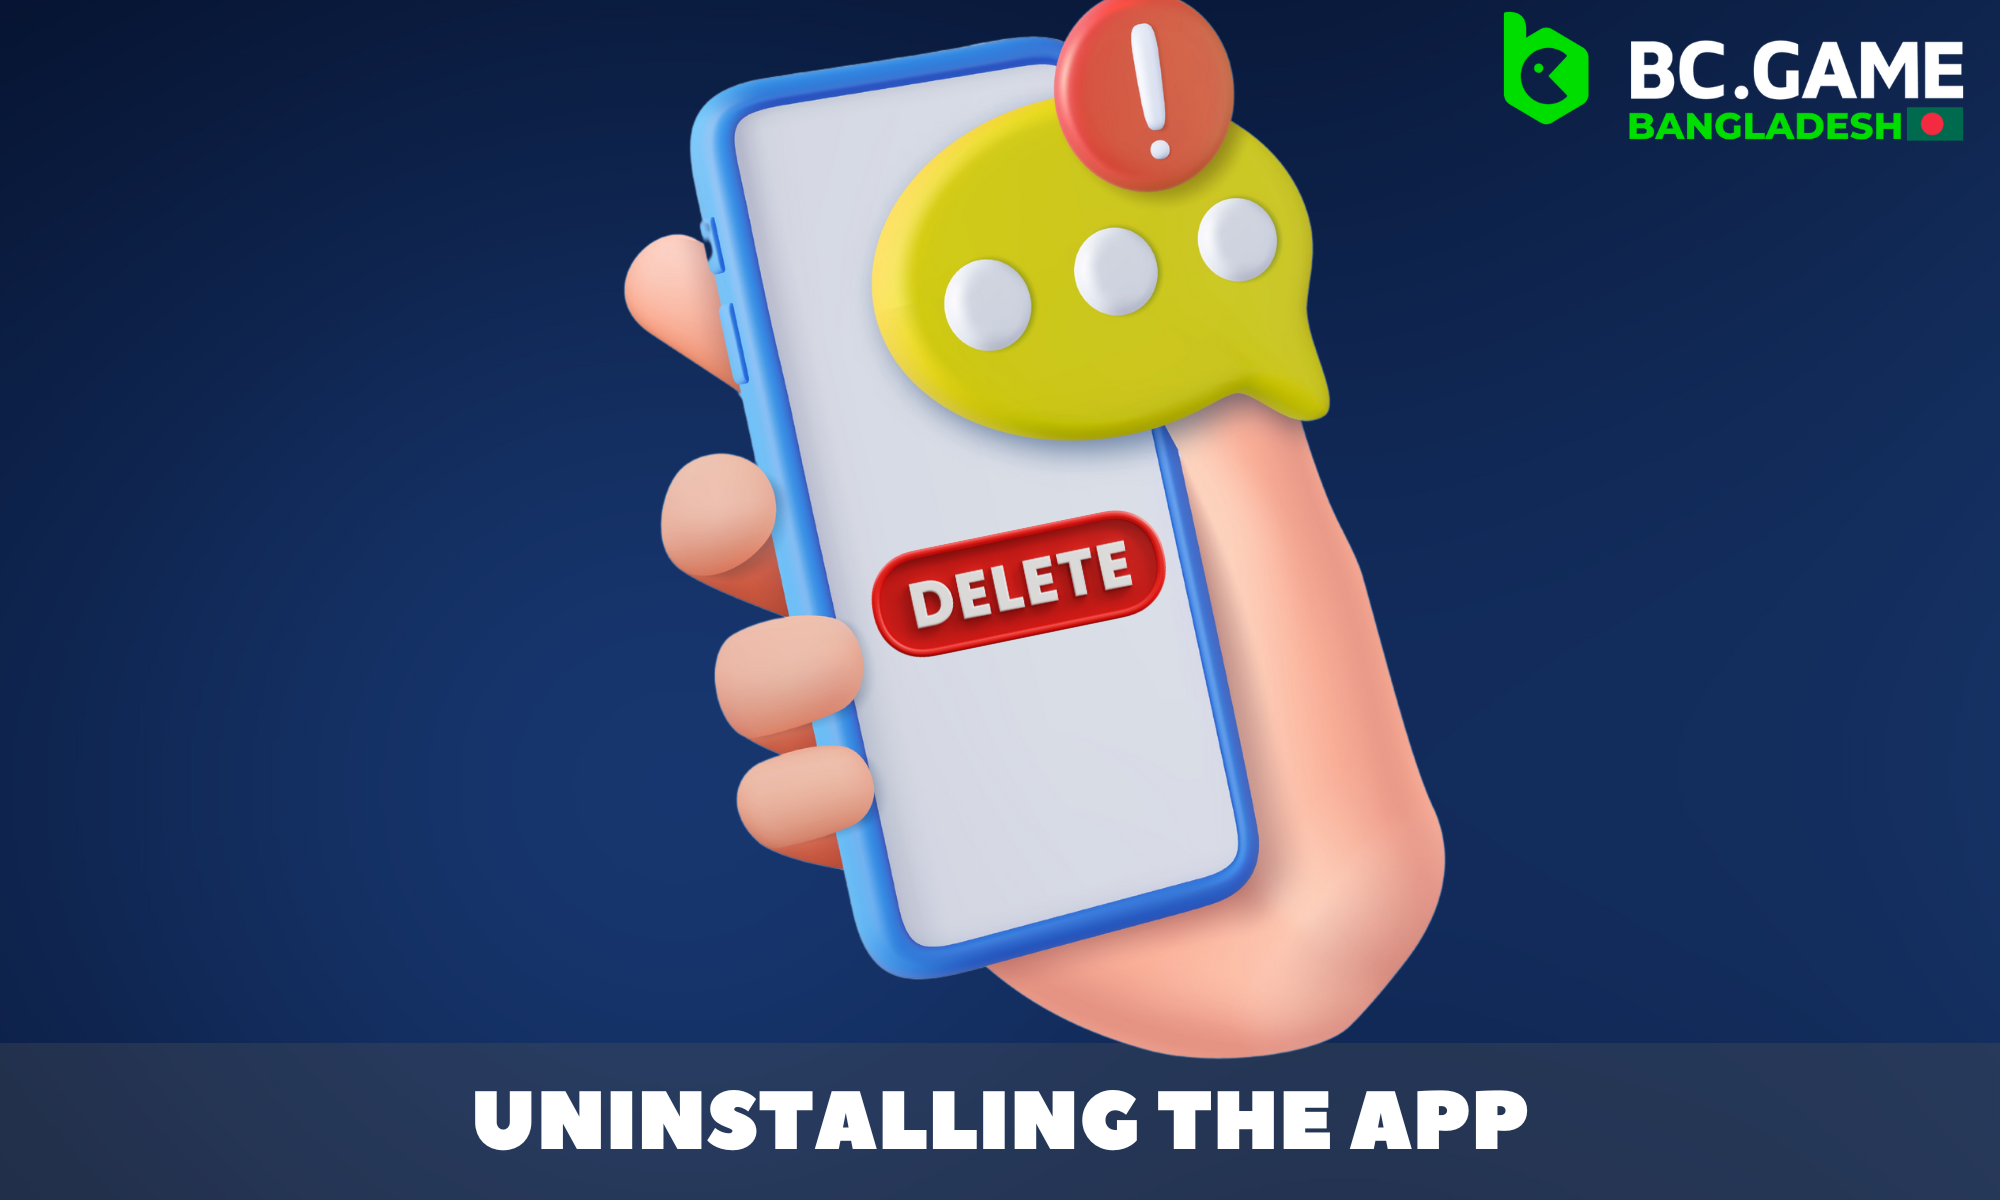 Step by step description of how to uninstall BC Game app